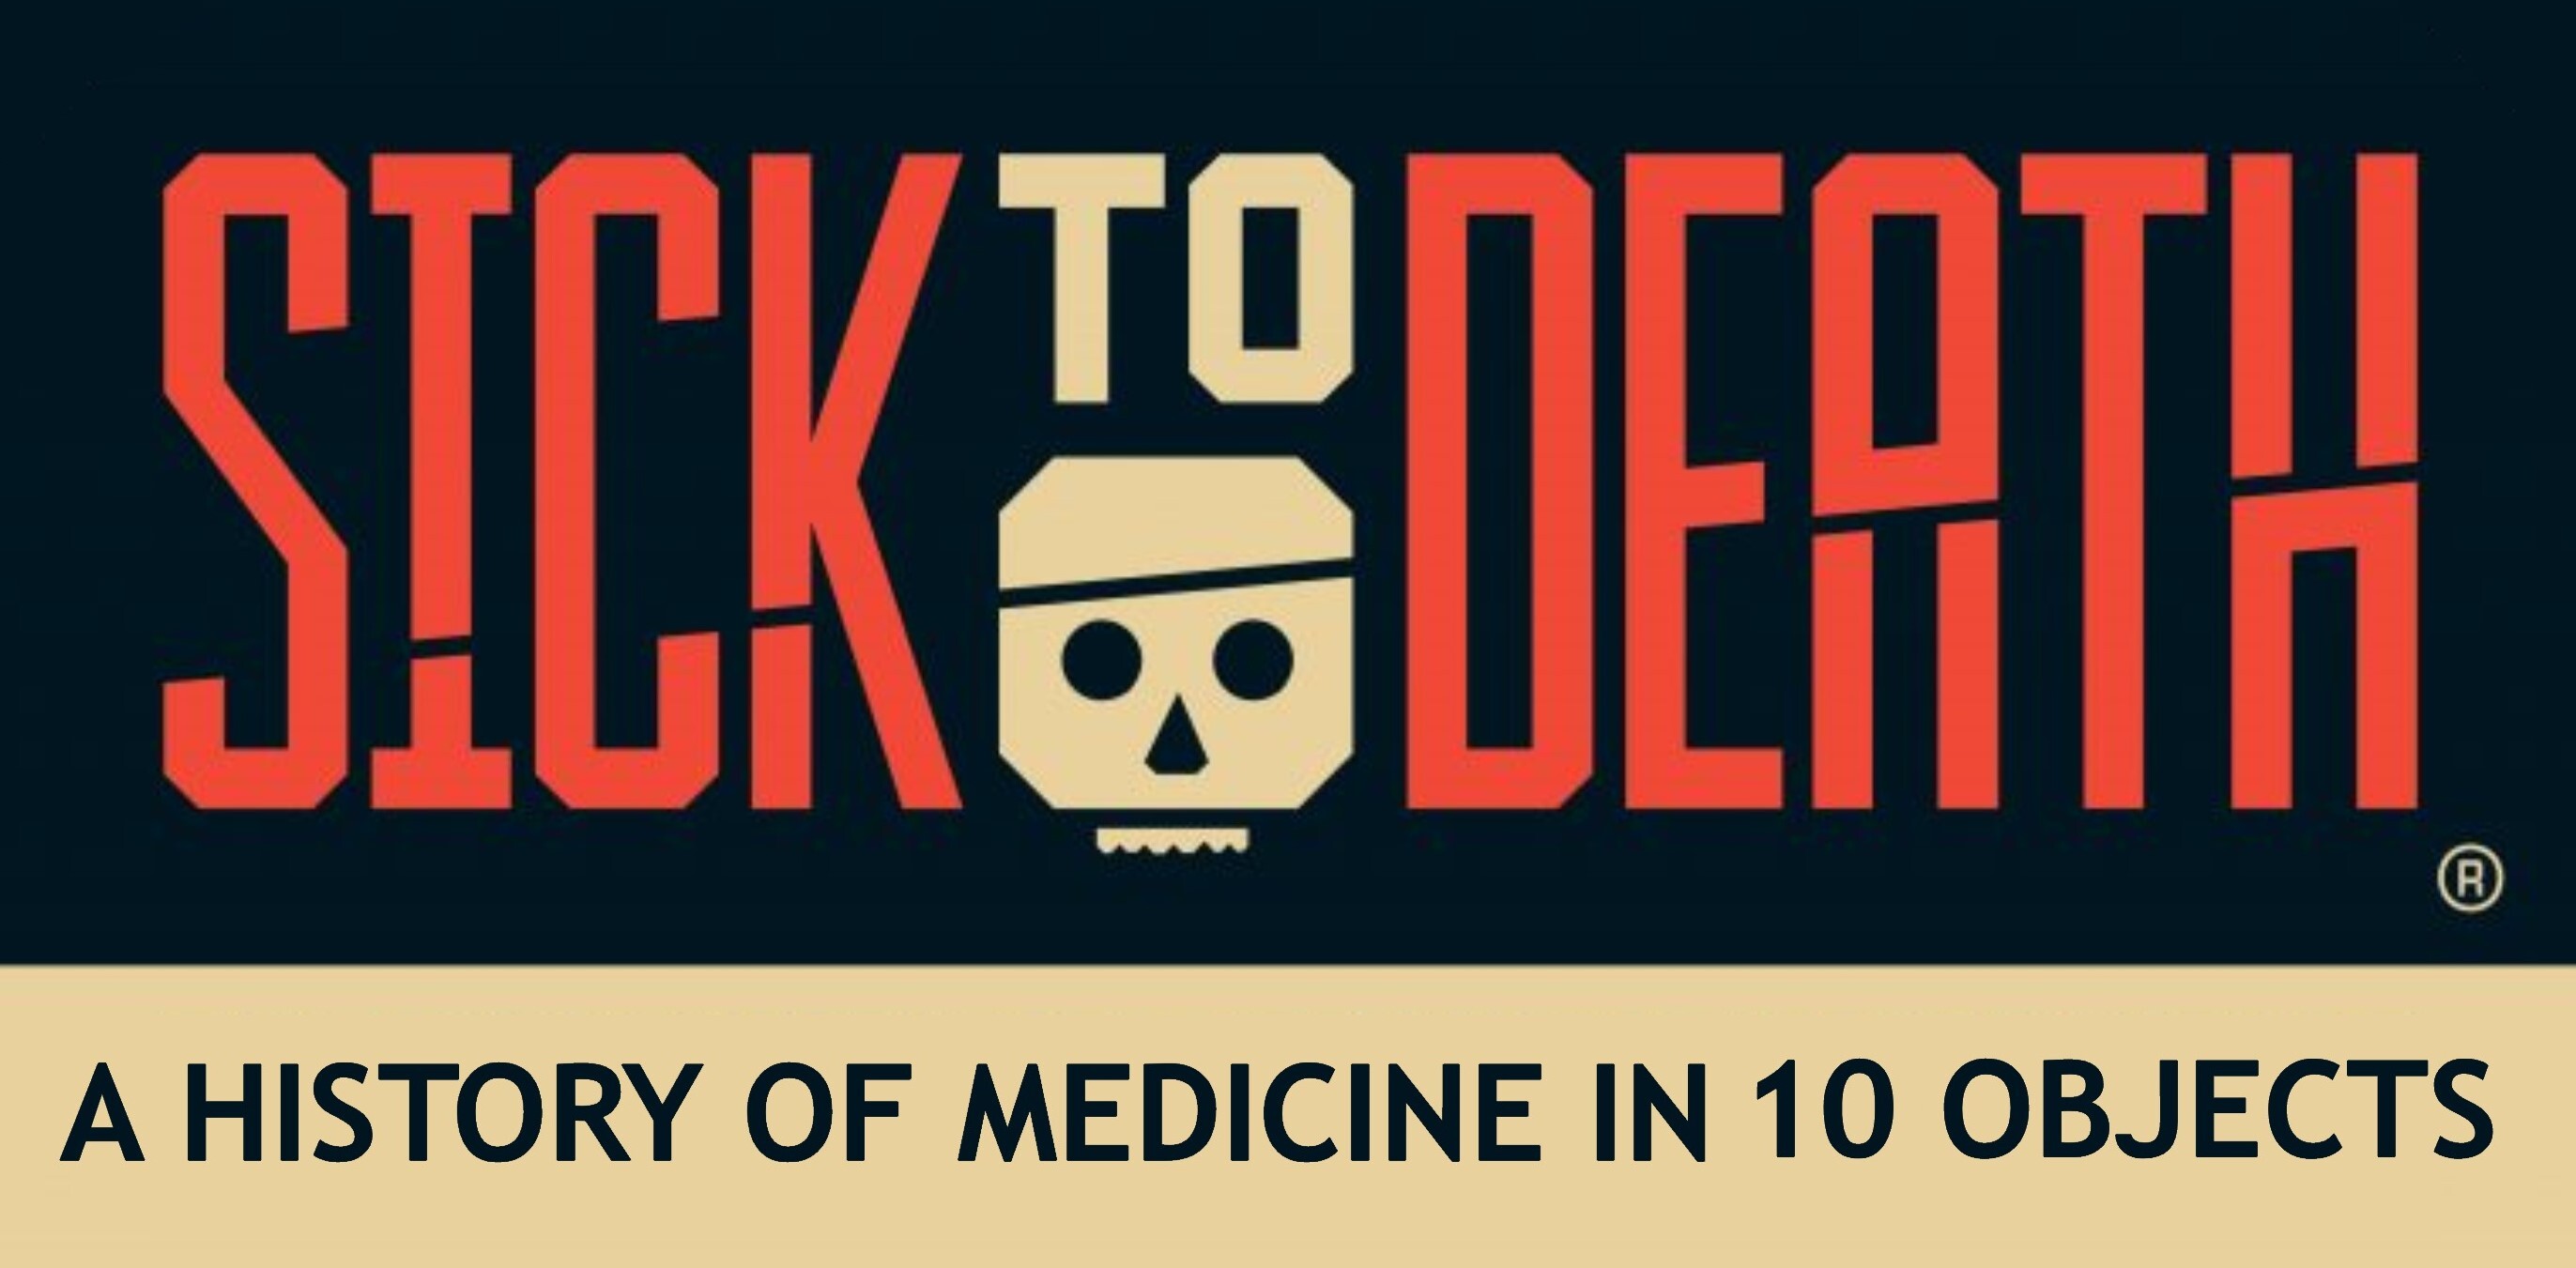 Sick to Death: A History of Medicine in 10 Objects